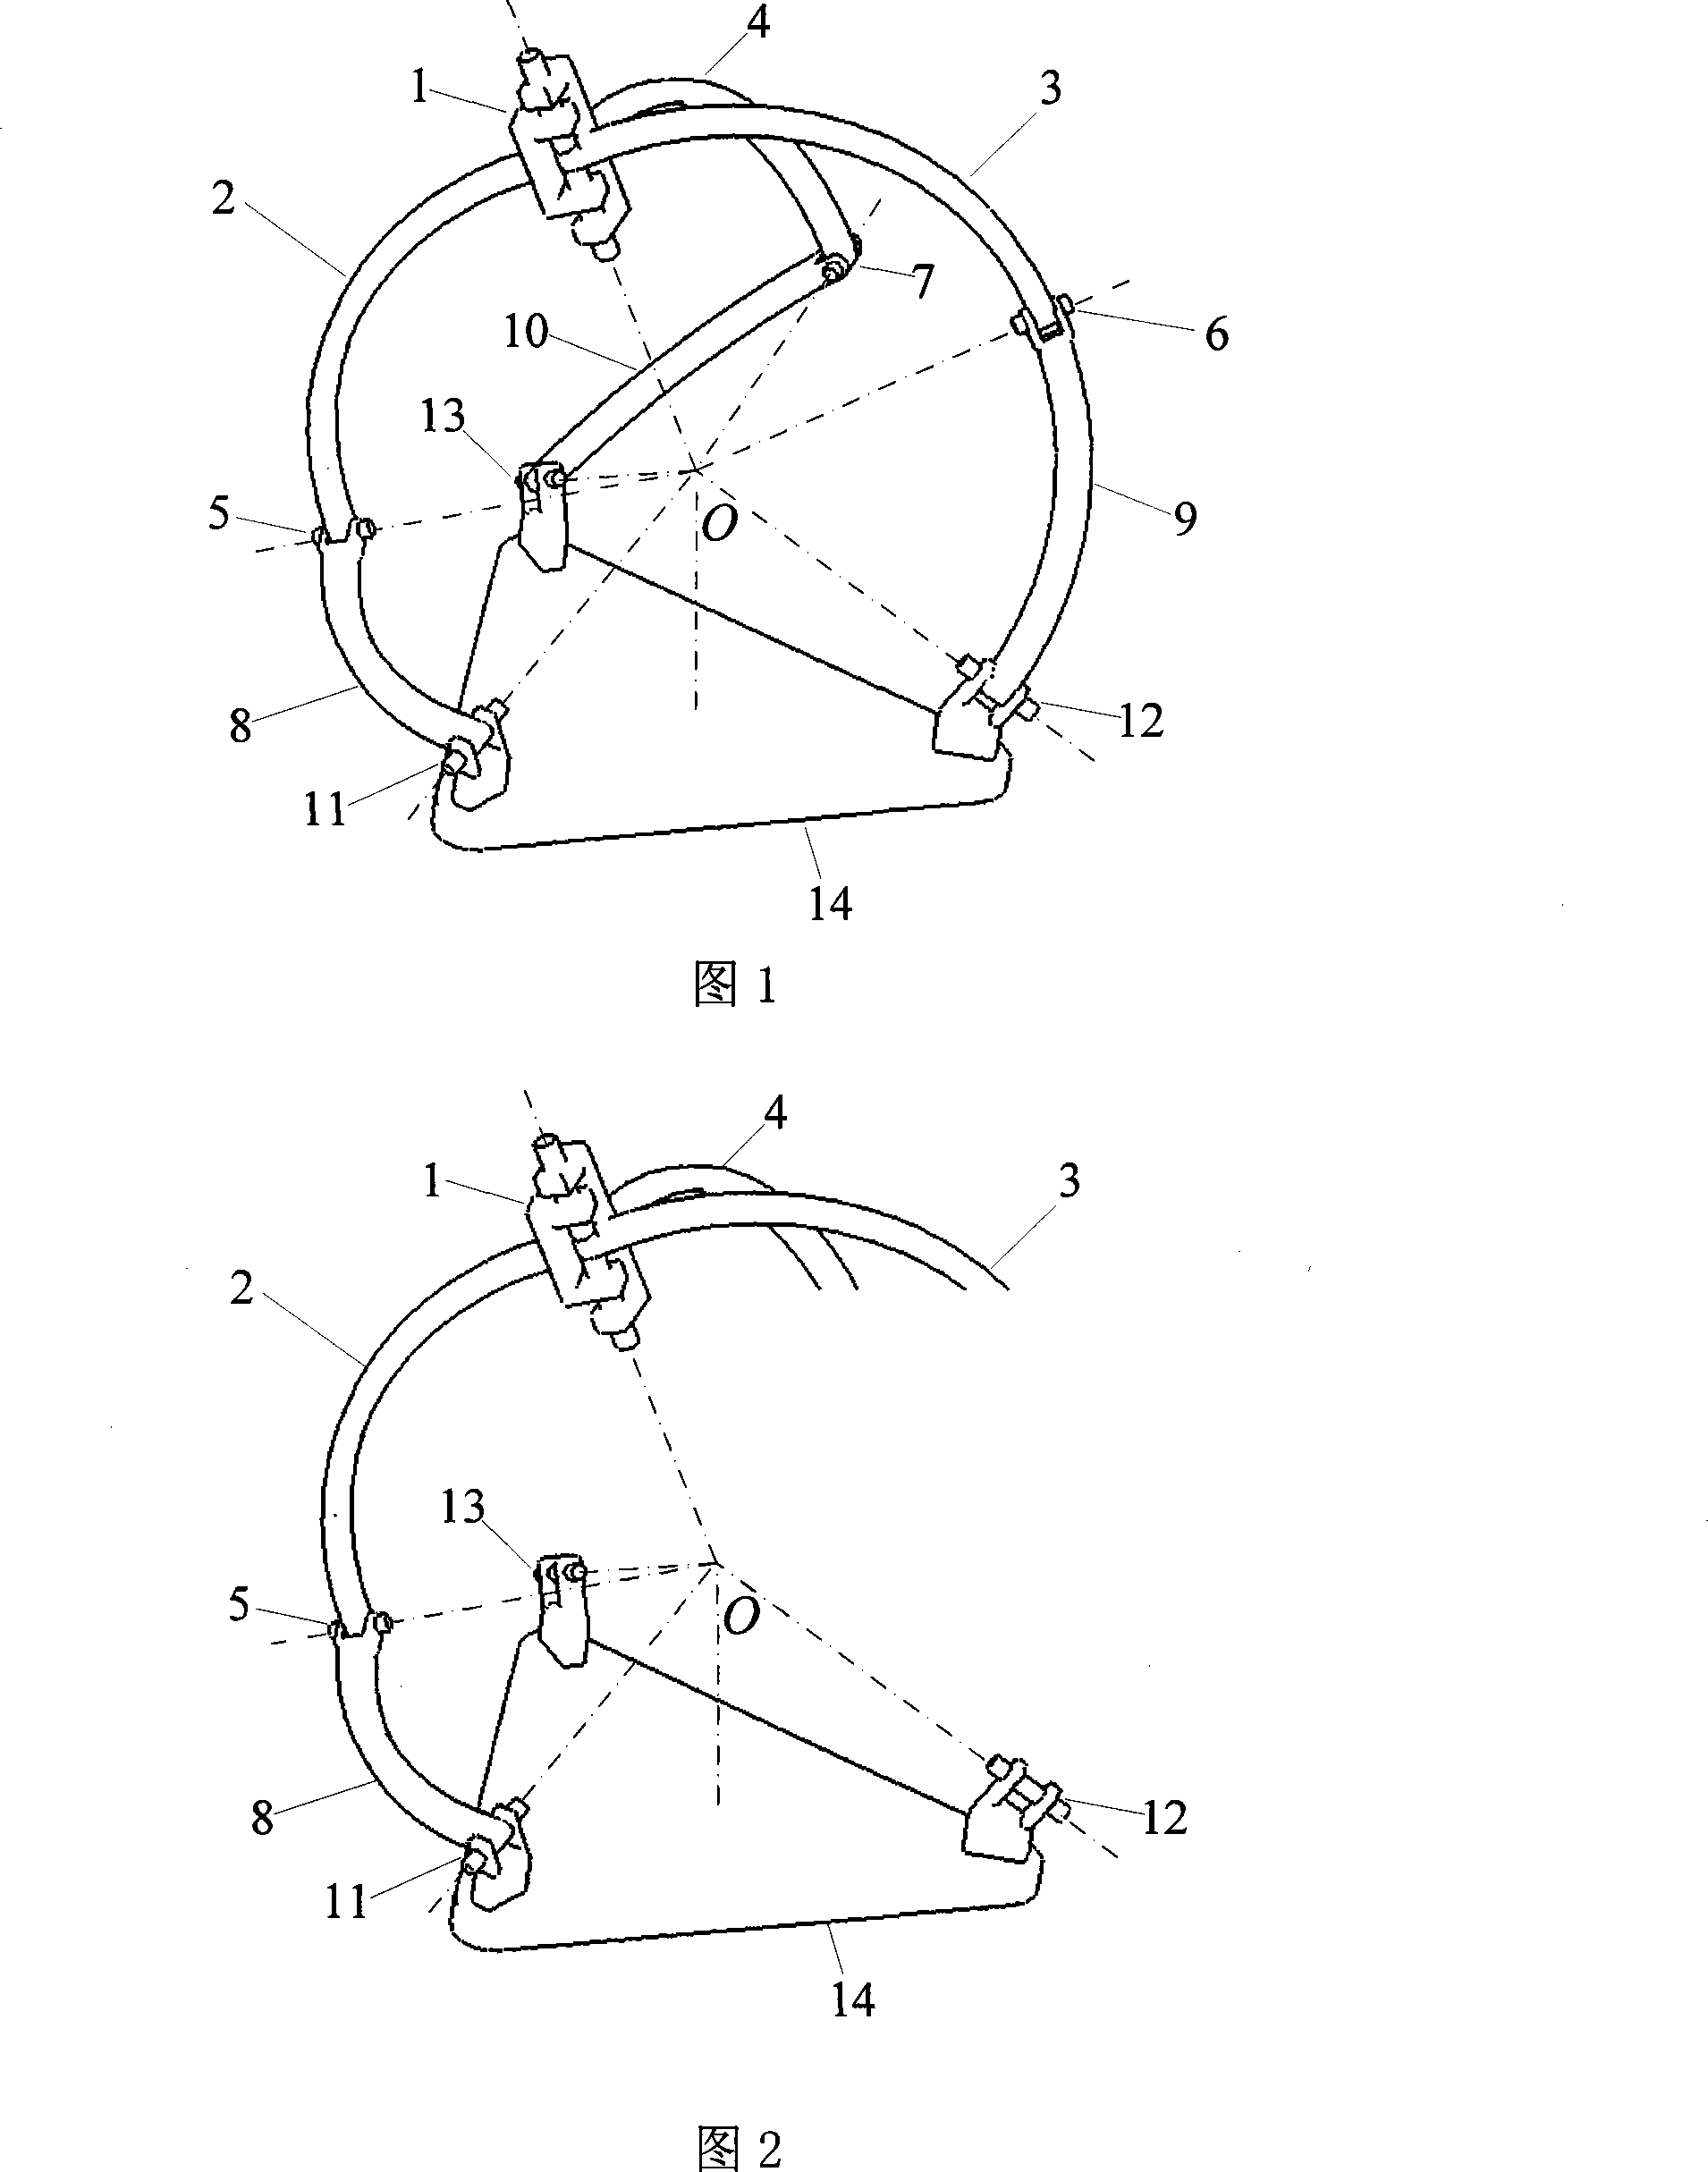 Spherical surface two-freedom symmetrical parallel connection robot mechanism with redundancy drive